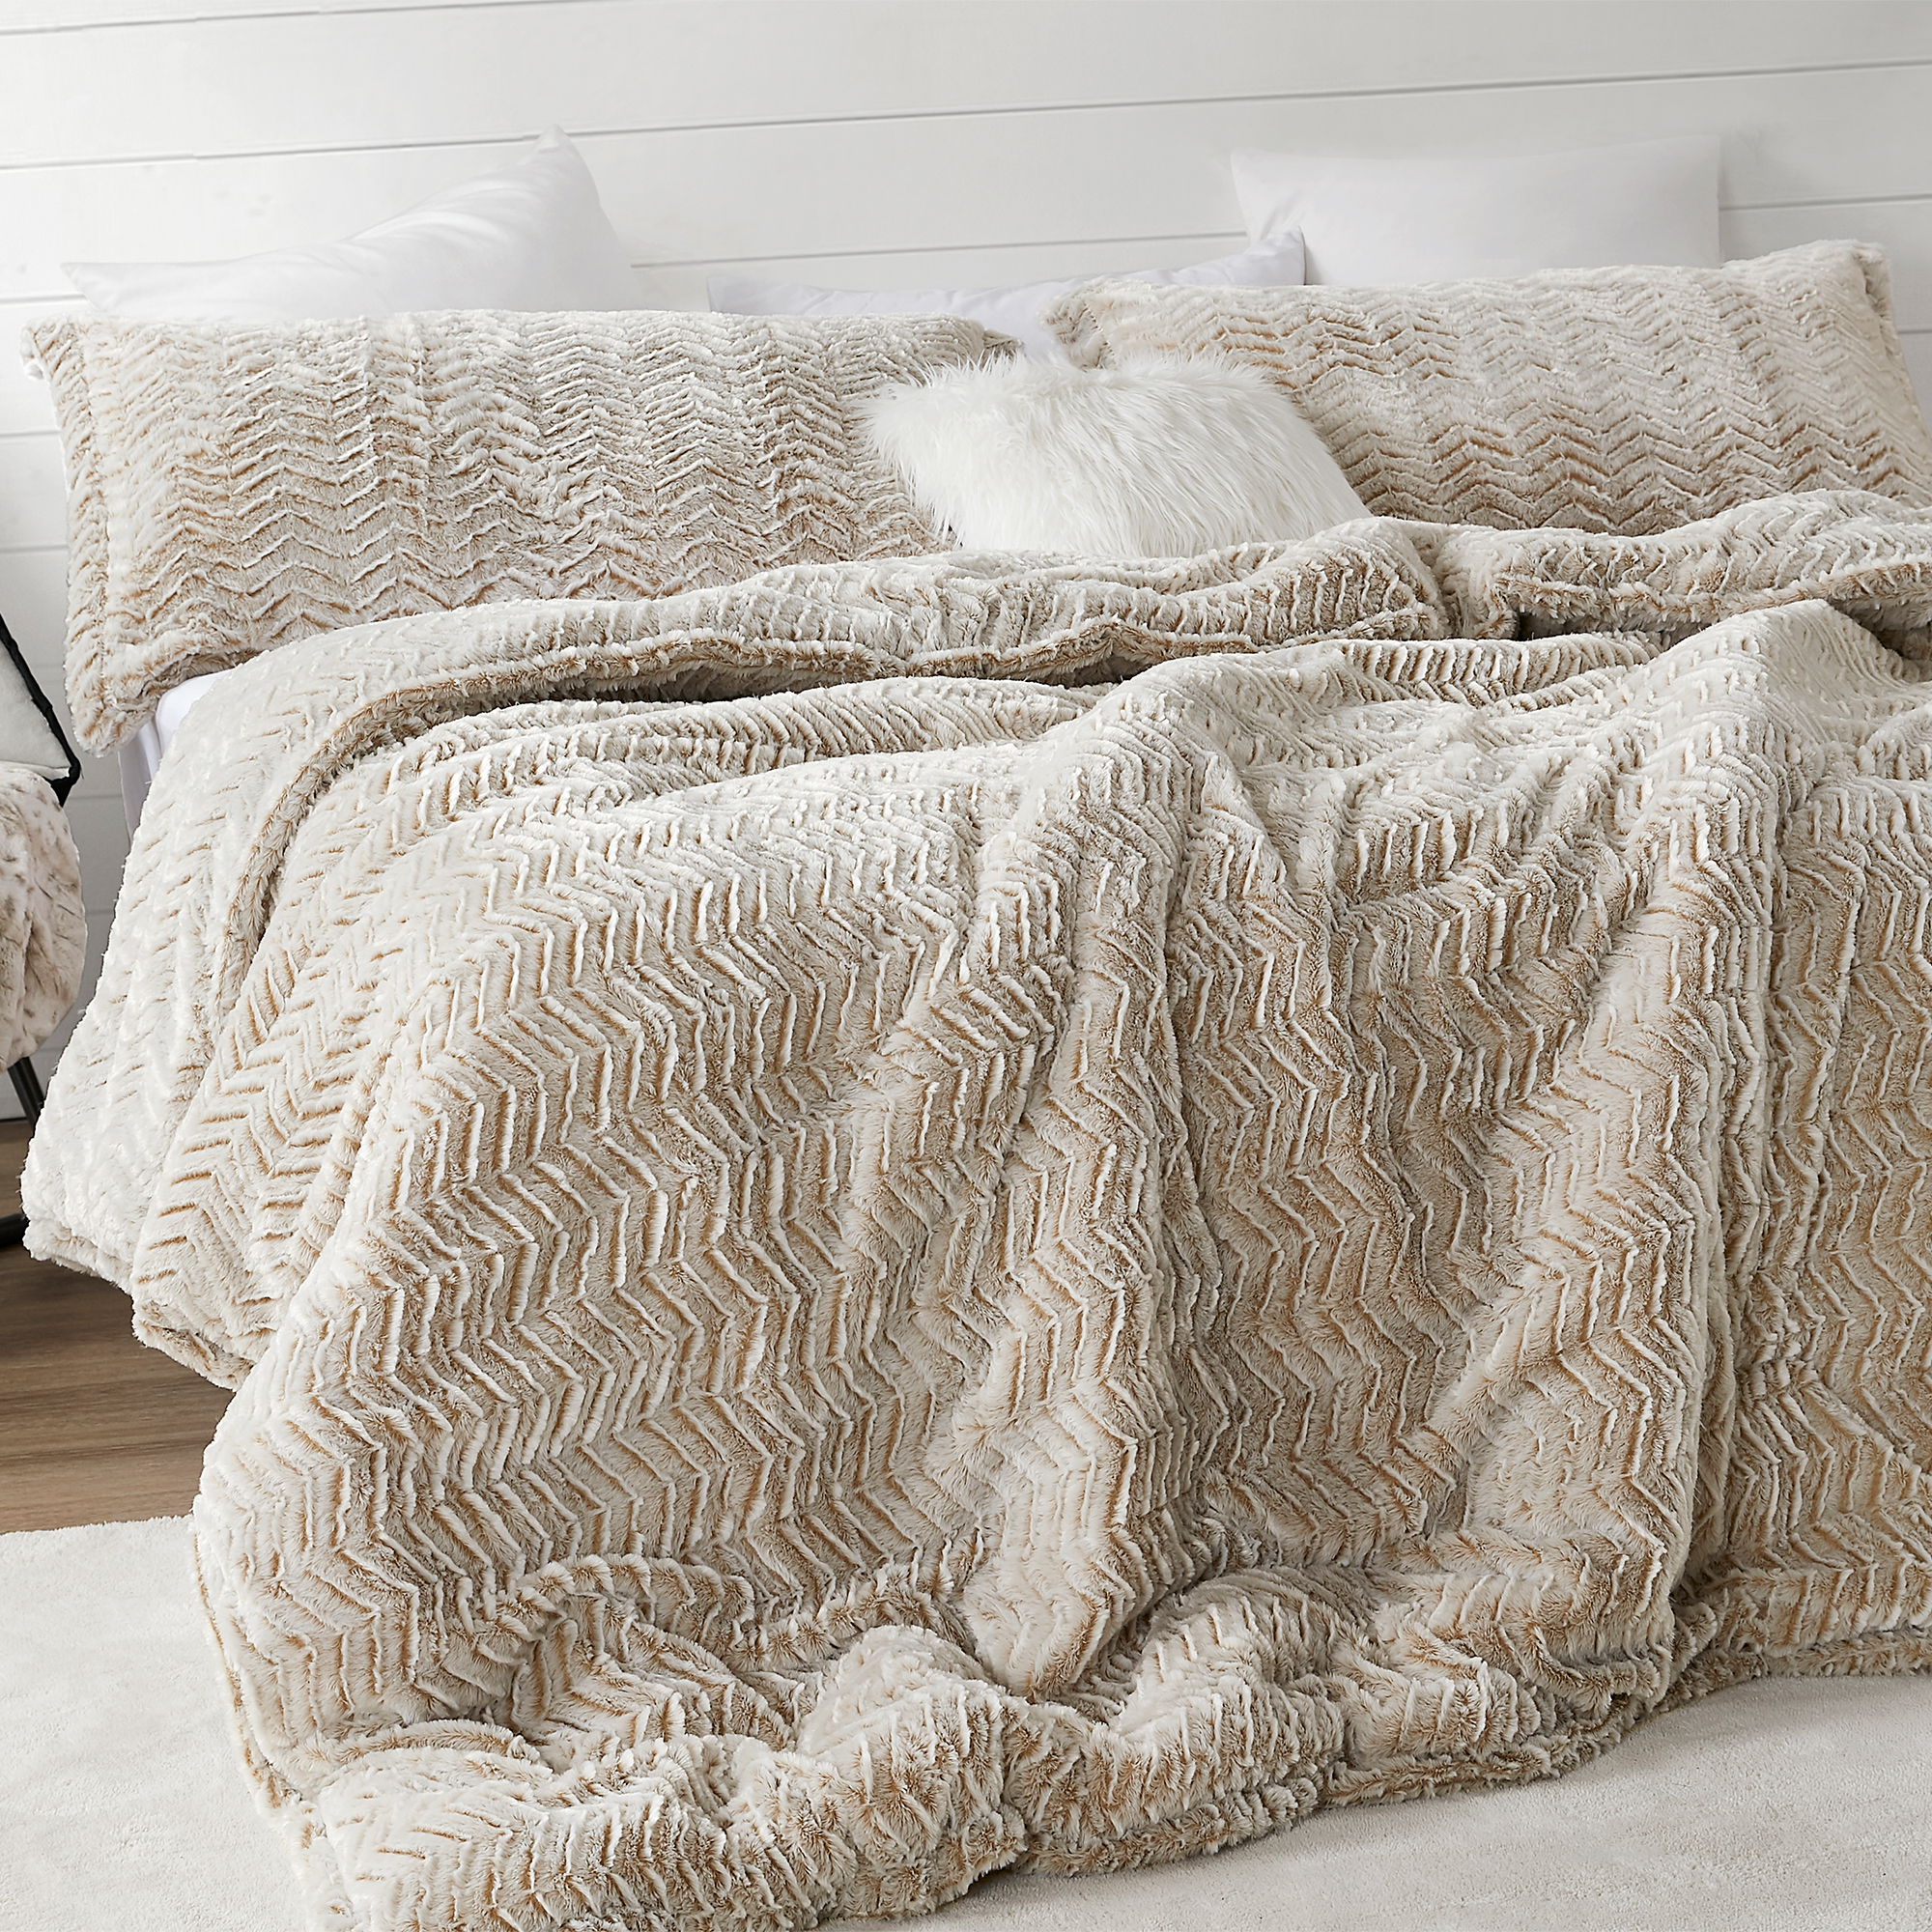 Frosted Taupe Extra Large Twin, Queen, or King Plush Comforter Set Made with Machine Washable Bedding Materials